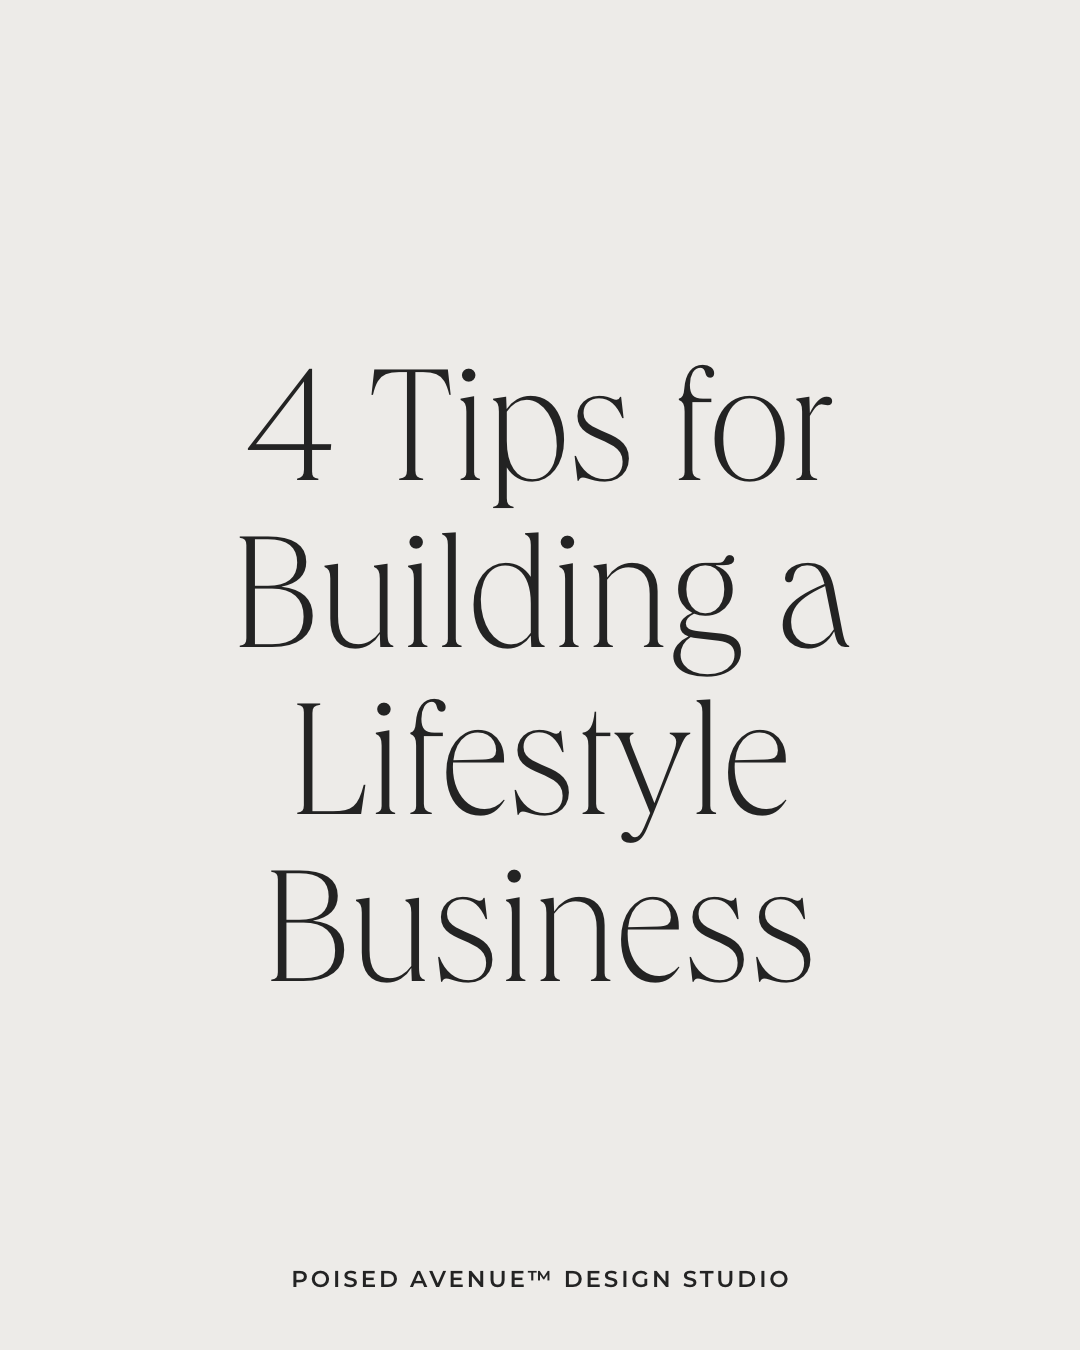 4 Tips for Building a Lifestyle Business by Amanda DeWoody of Poised Avenue Design Studio, a Temecula Valley Design Studio